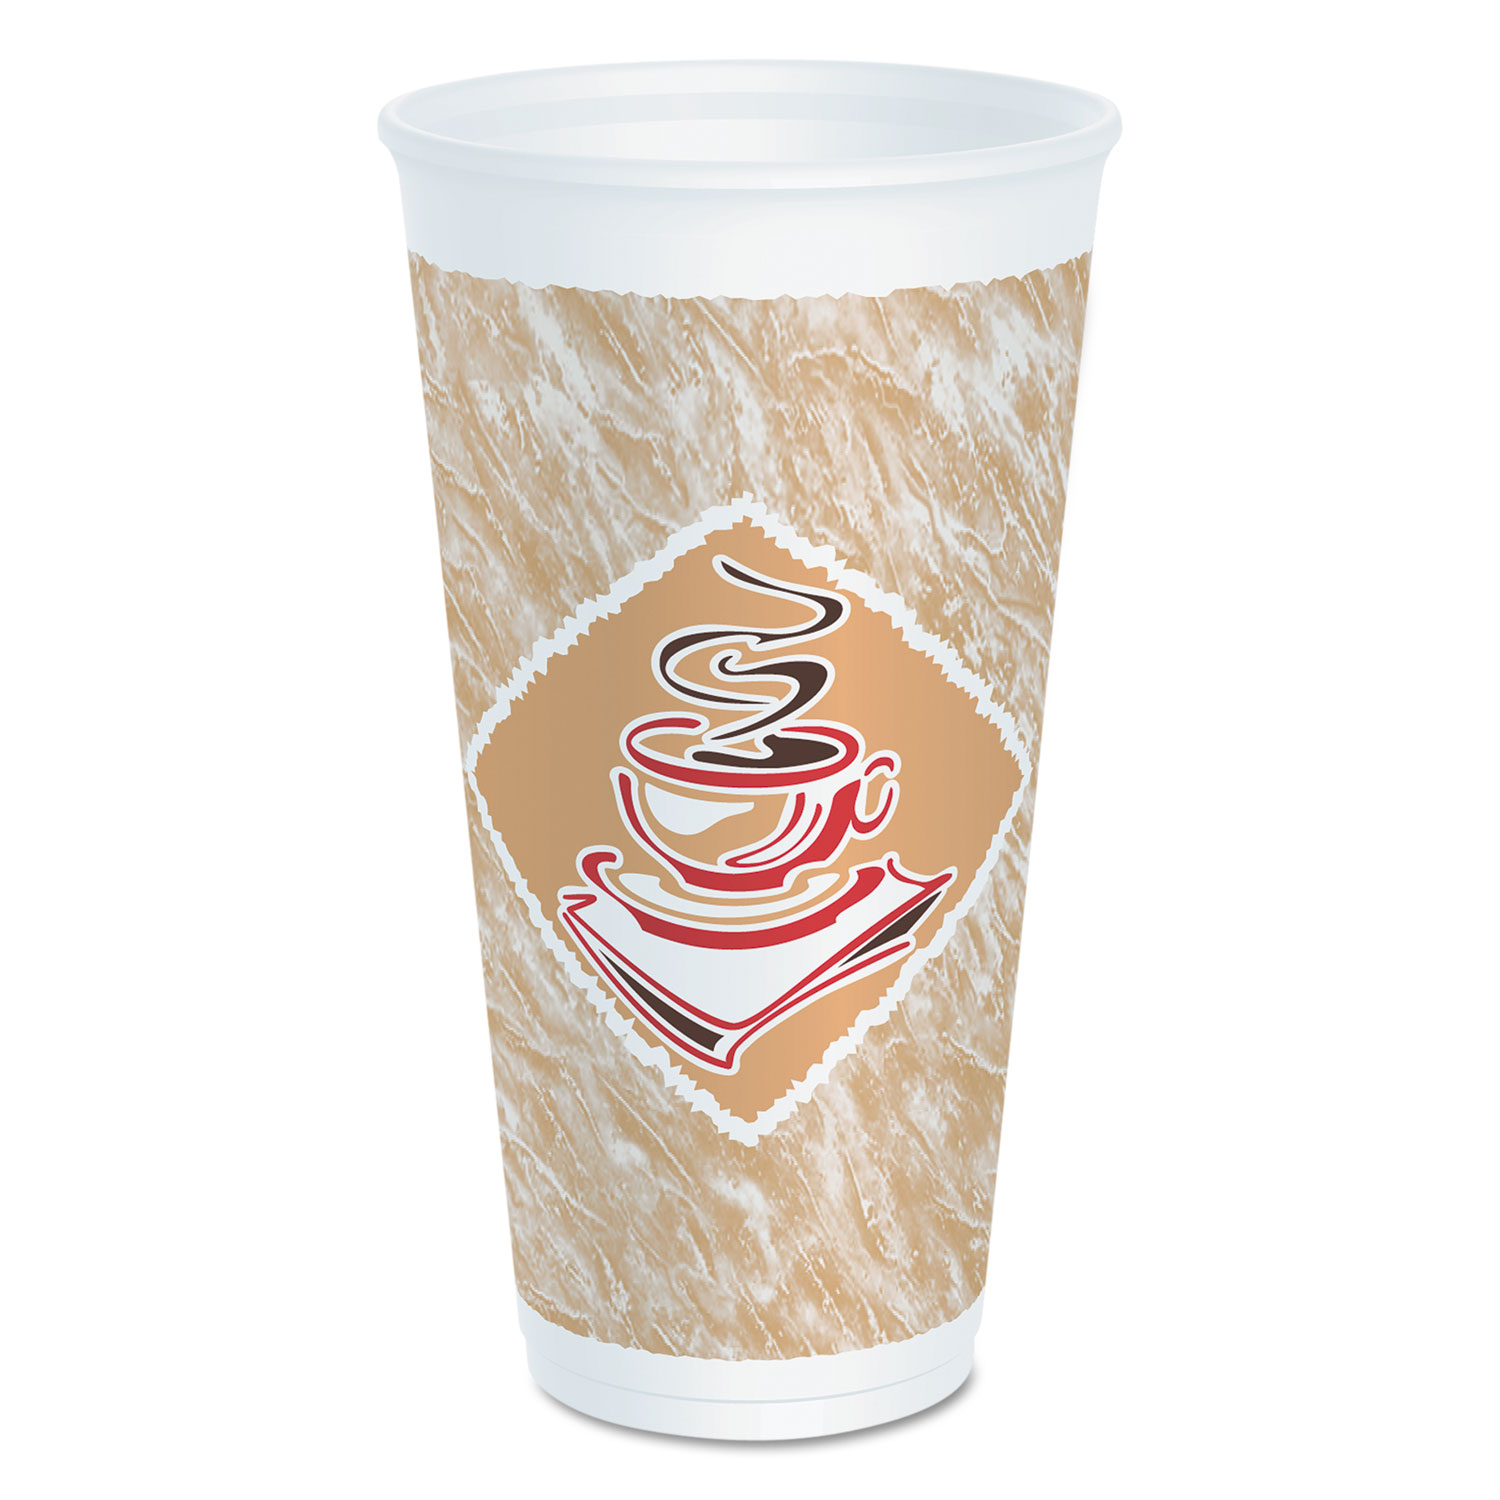  Dart 20X16G Cafe G Foam Hot/Cold Cups, 20 oz, Brown/Red/White, 20/Pack (DCC20X16GPK) 